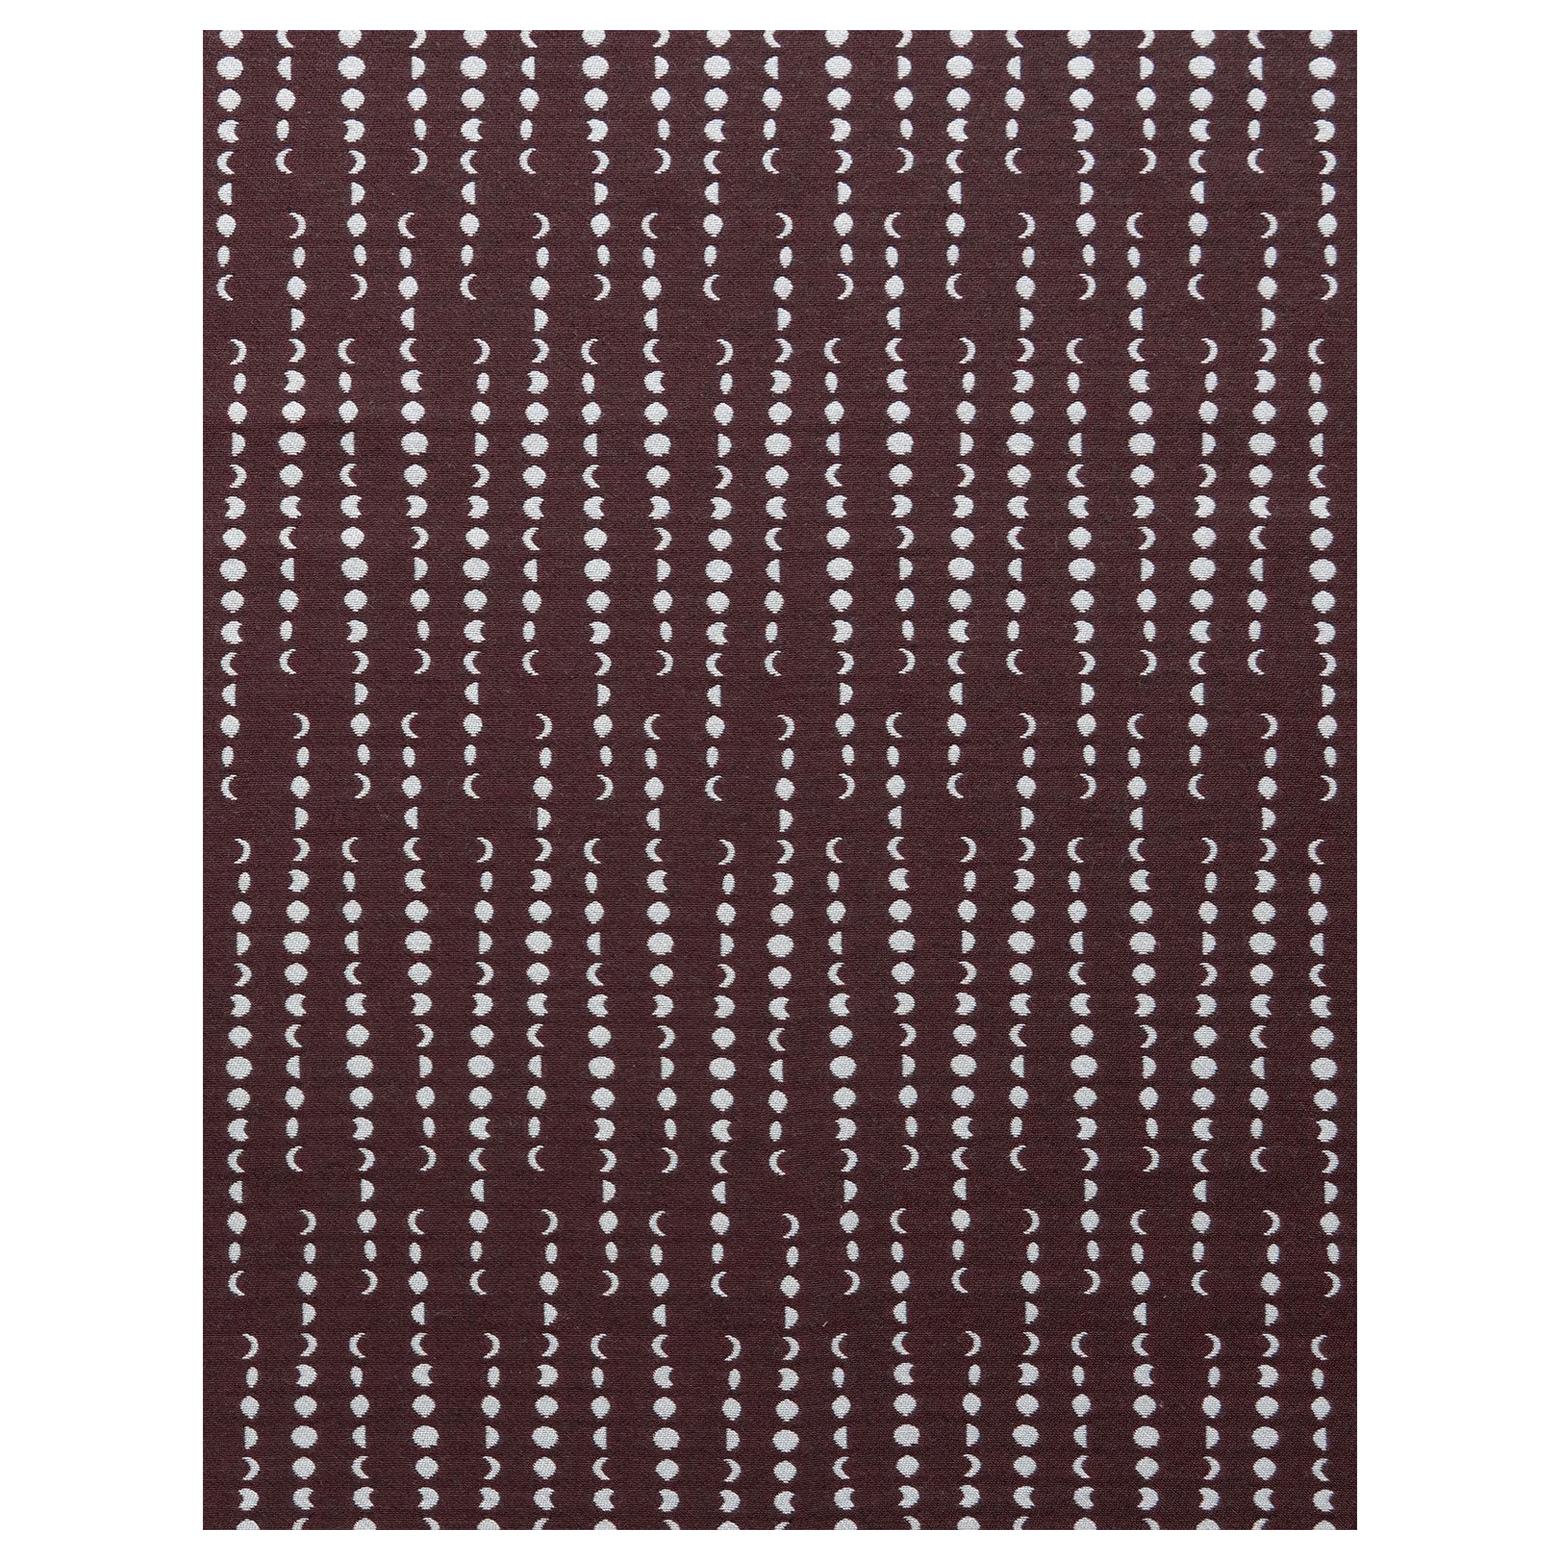 Earthlight Moon Woven Commercial Grade Fabric in Astra:: Grau und Burgundy im Angebot